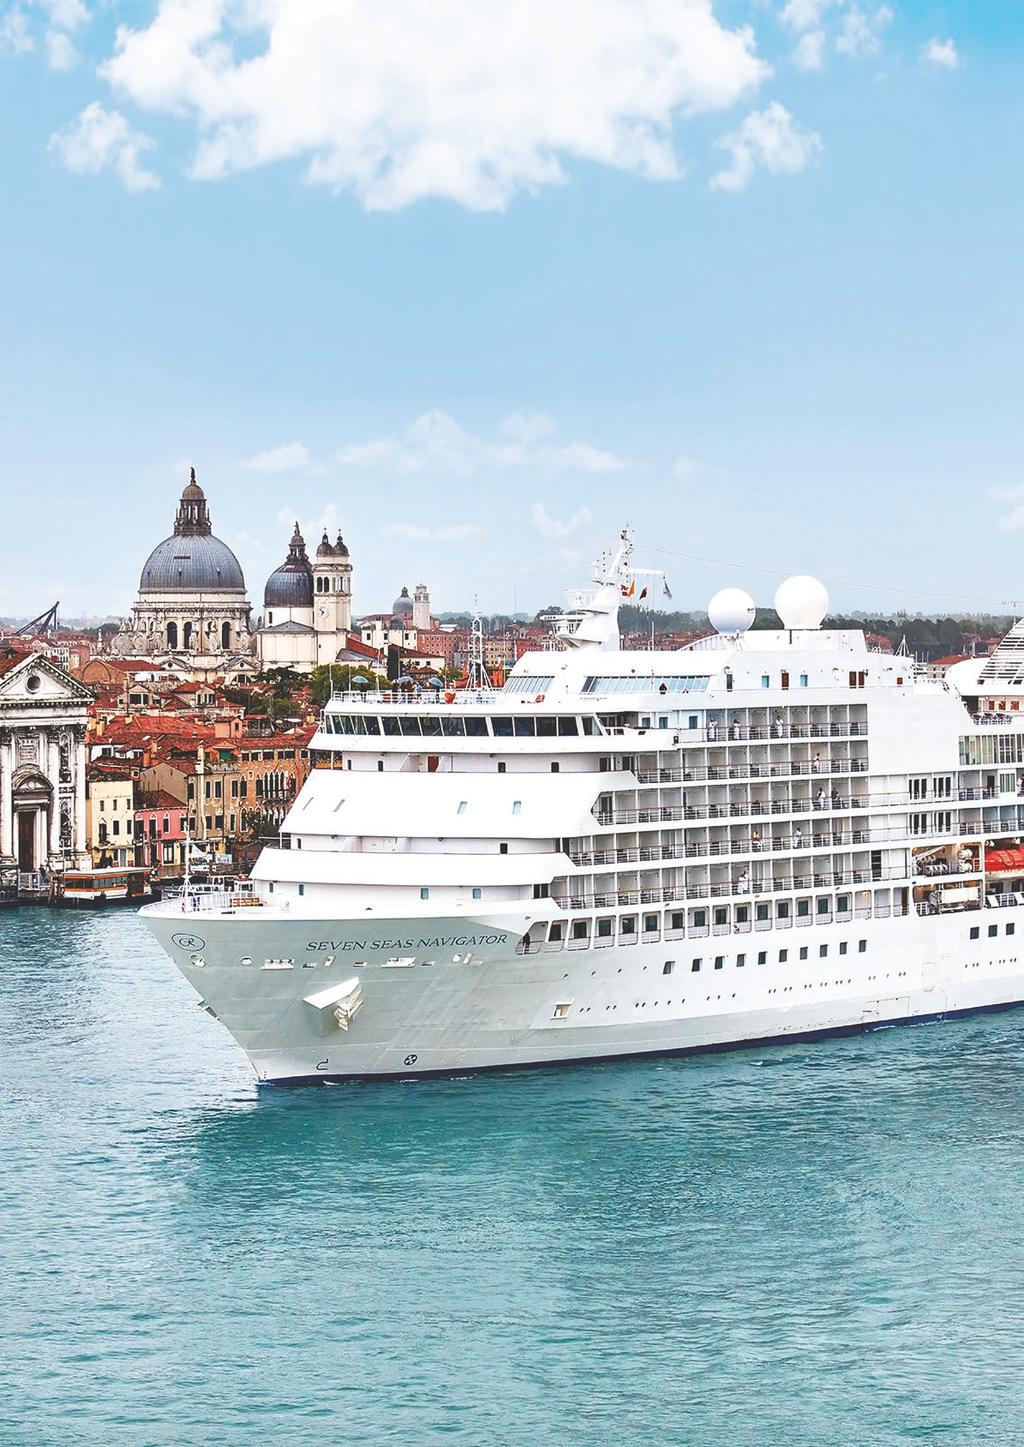 8 Top Reasons to Take a Cruise If you are among those considering taking your first cruise here are our top 8 reasons to take a cruise Value - Sailing away has never been more affordable. 1.